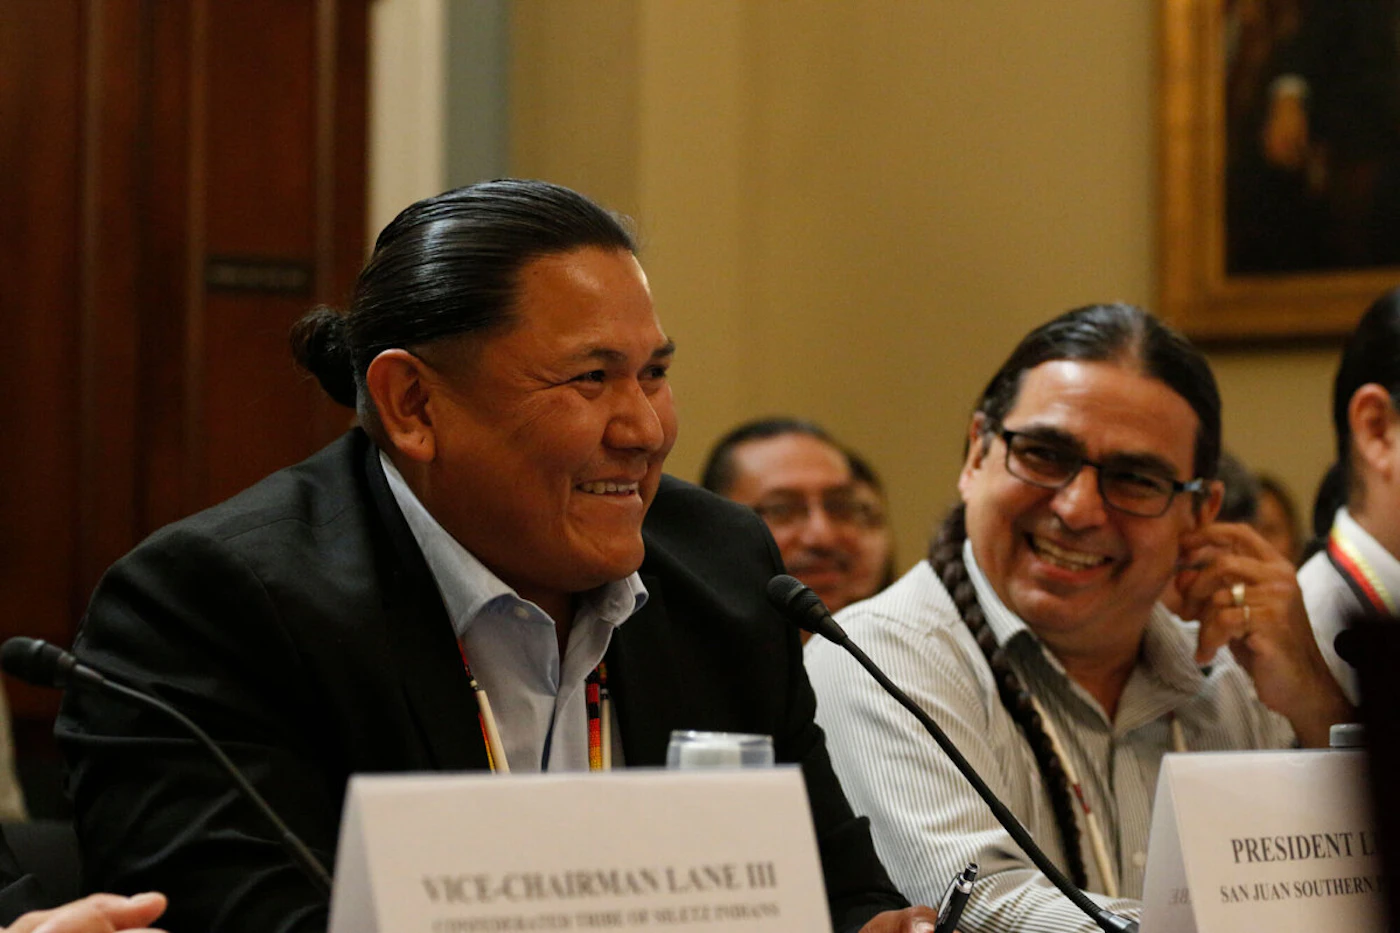 The San Juan Southern Paiute Tribe is the only ederally recognized tribe in Arizona without its own treaty lands. Tribal President Johnny Lehi Jr. said a proposal to grant lands the tribe would "make us stronger in our self-governance." (Photo by Lillie BoudreauxCronkite News)